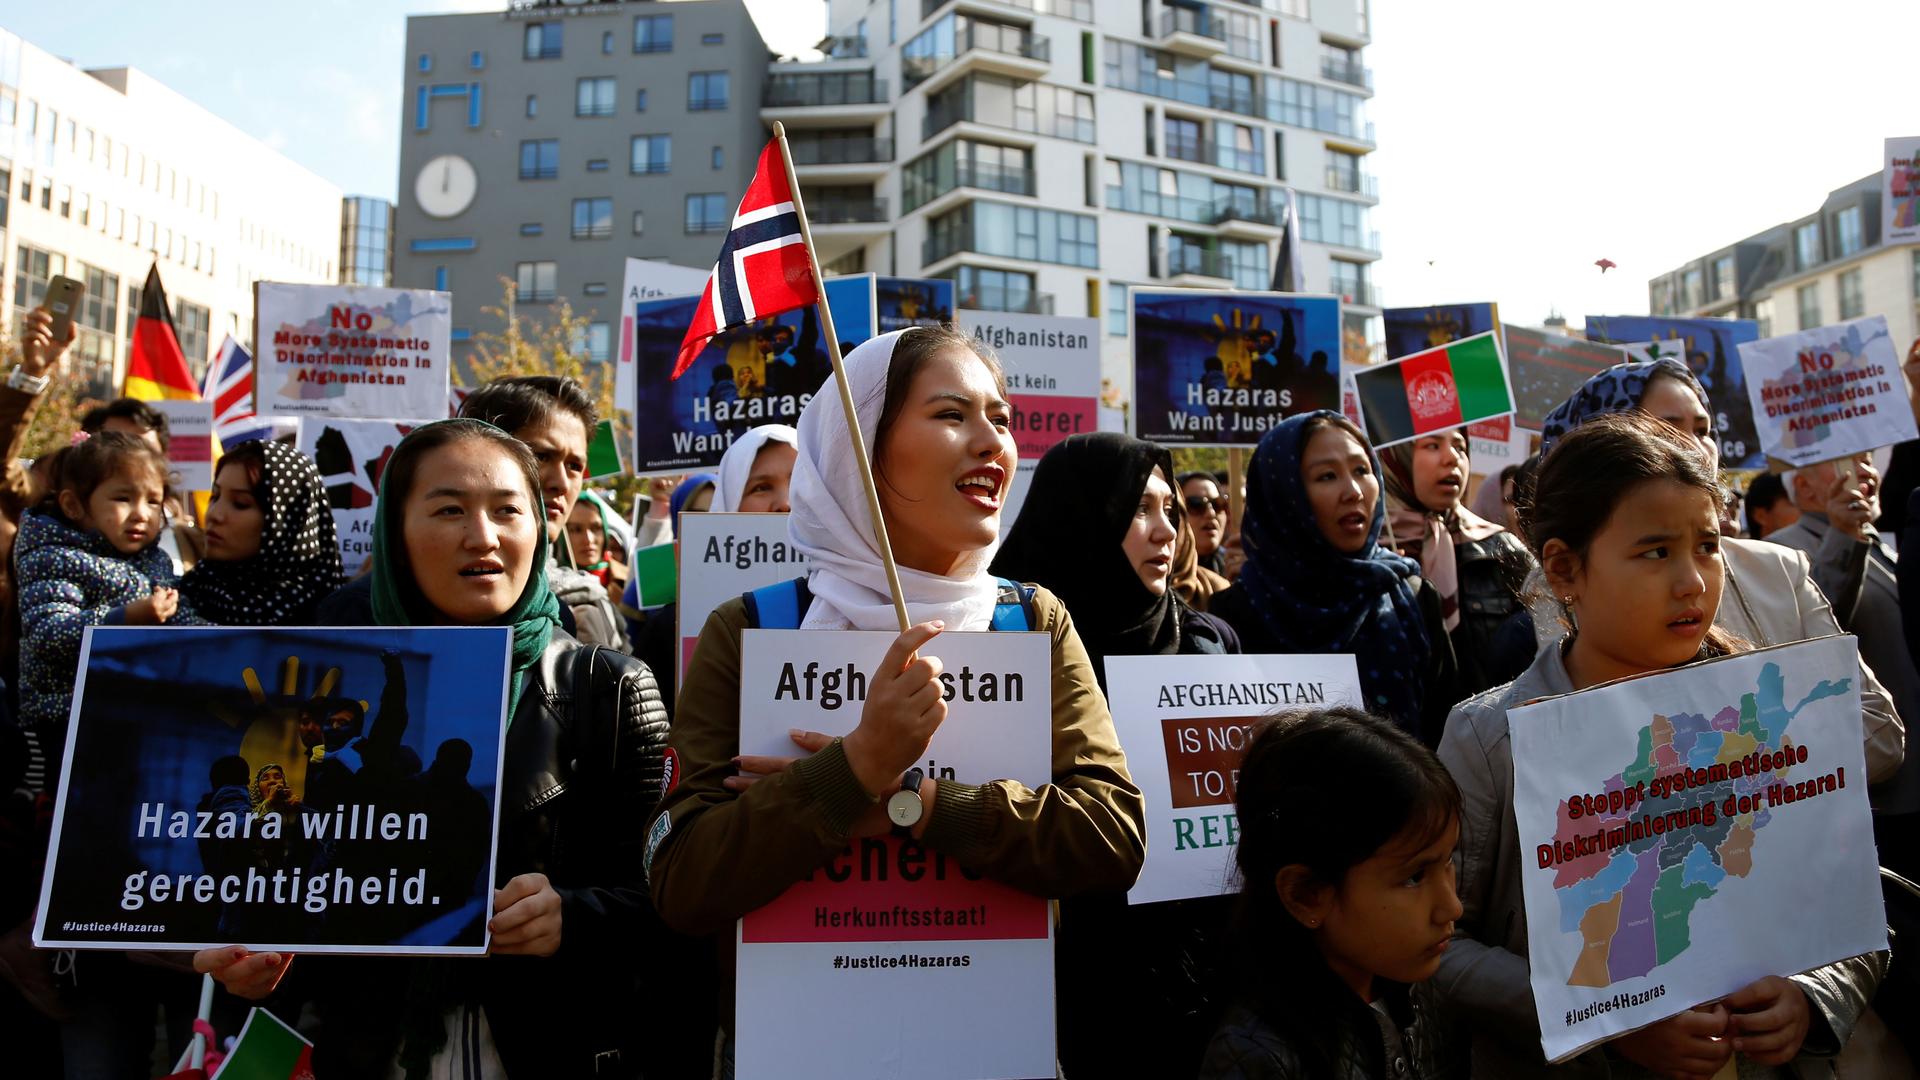 Demonstrators hold placards and attend a rally outside the Brussels Conference on Afghanistan, in Belgium, October 5, 2016.